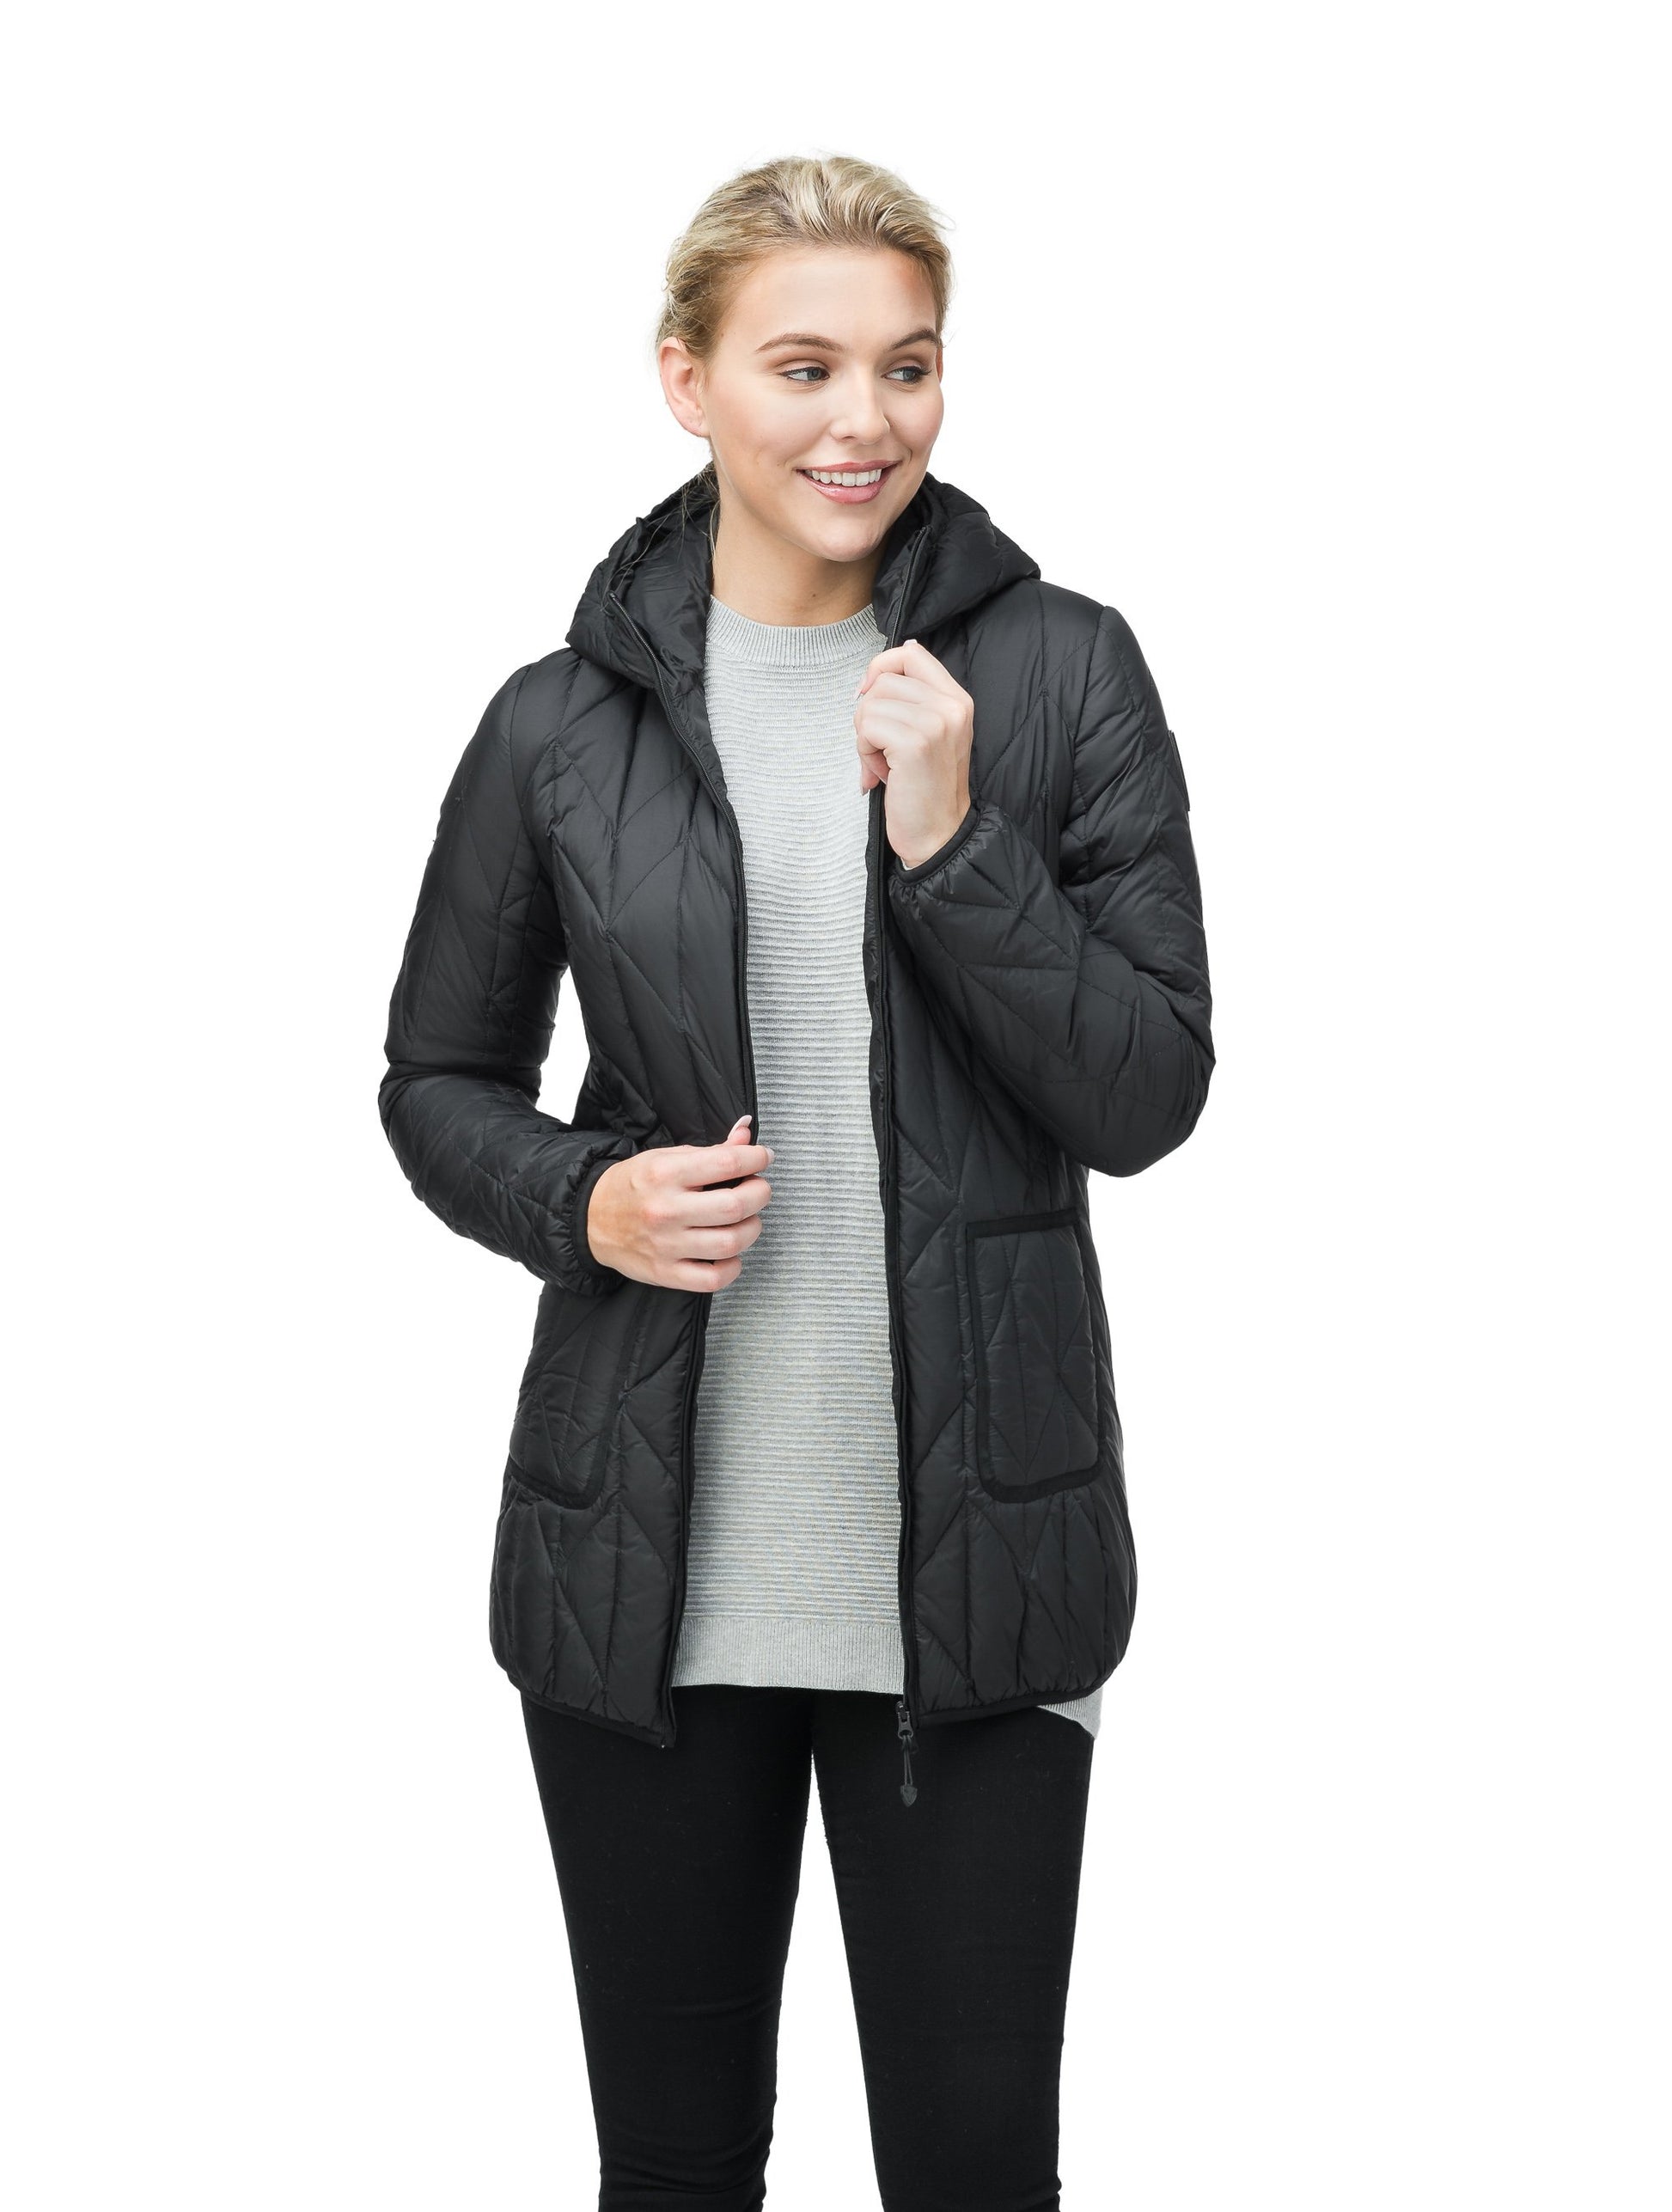 Women's down filled lightweight jacket with fishbone quilting and mid thigh silhouette in Black